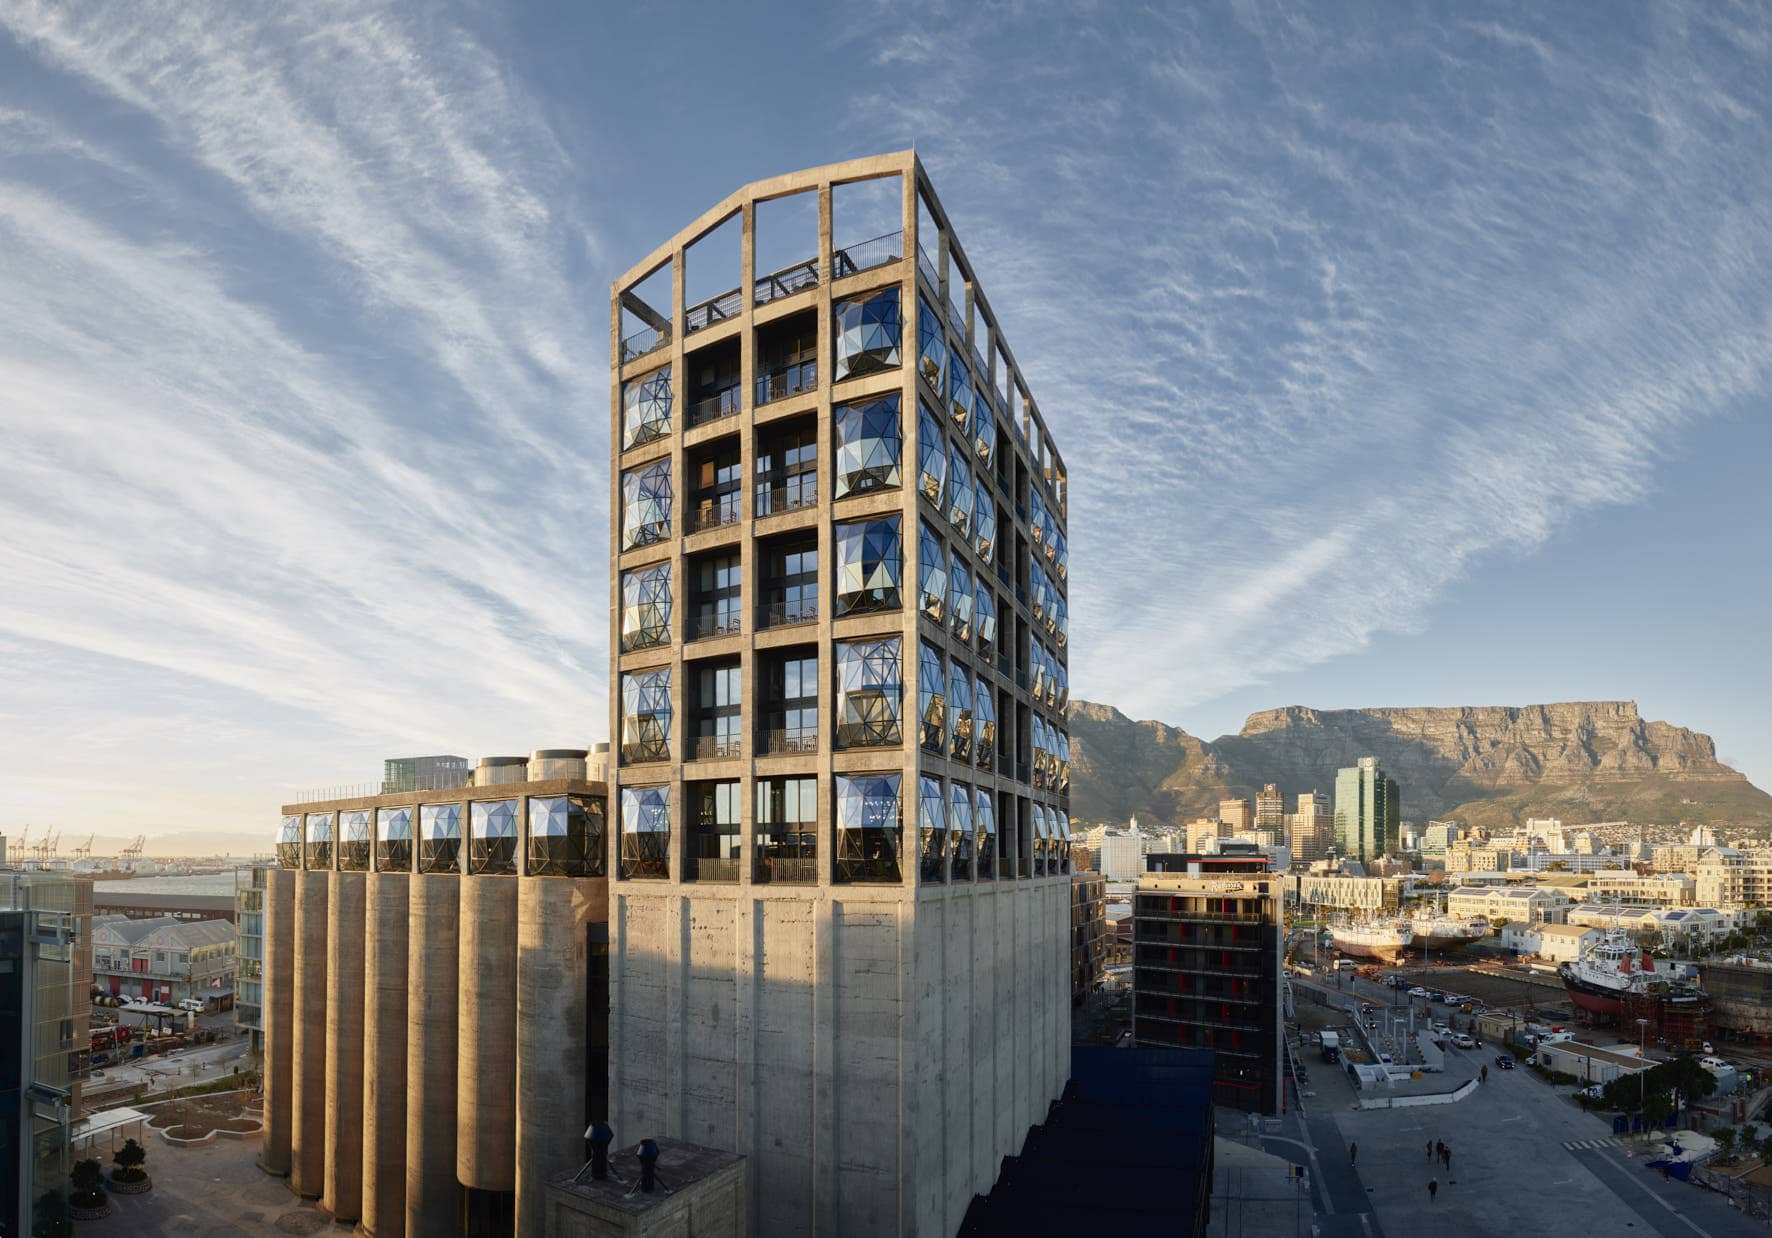 Zeitz MOCAA: A museum centred on Access for All